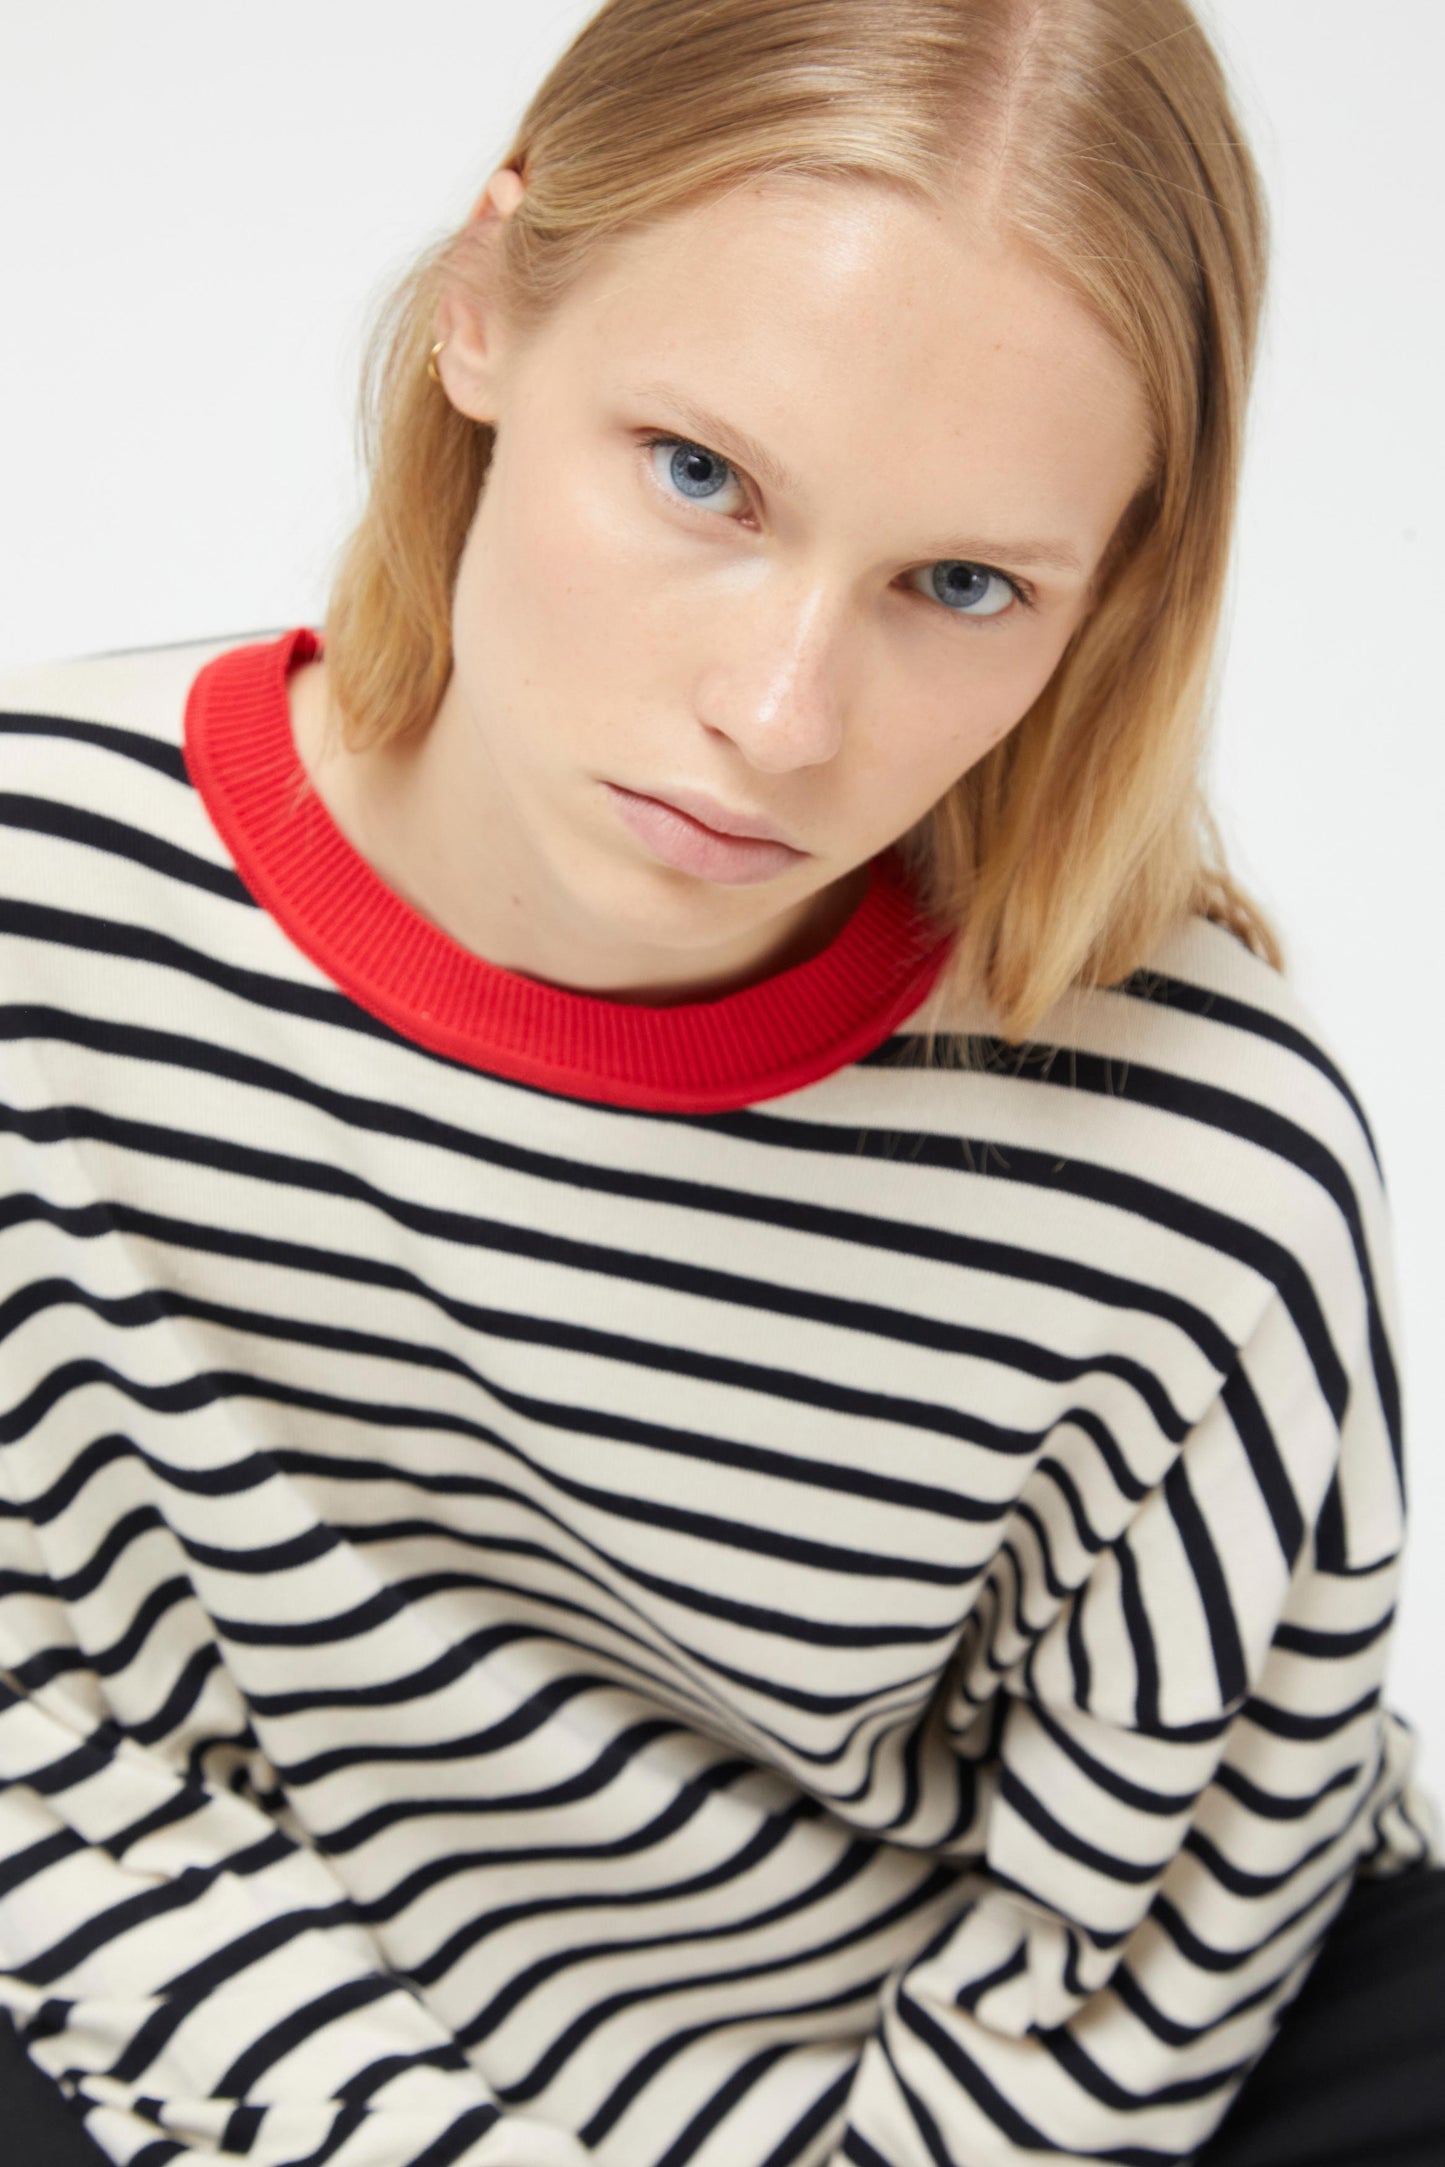 Coraline Striped Long Sleeve Top